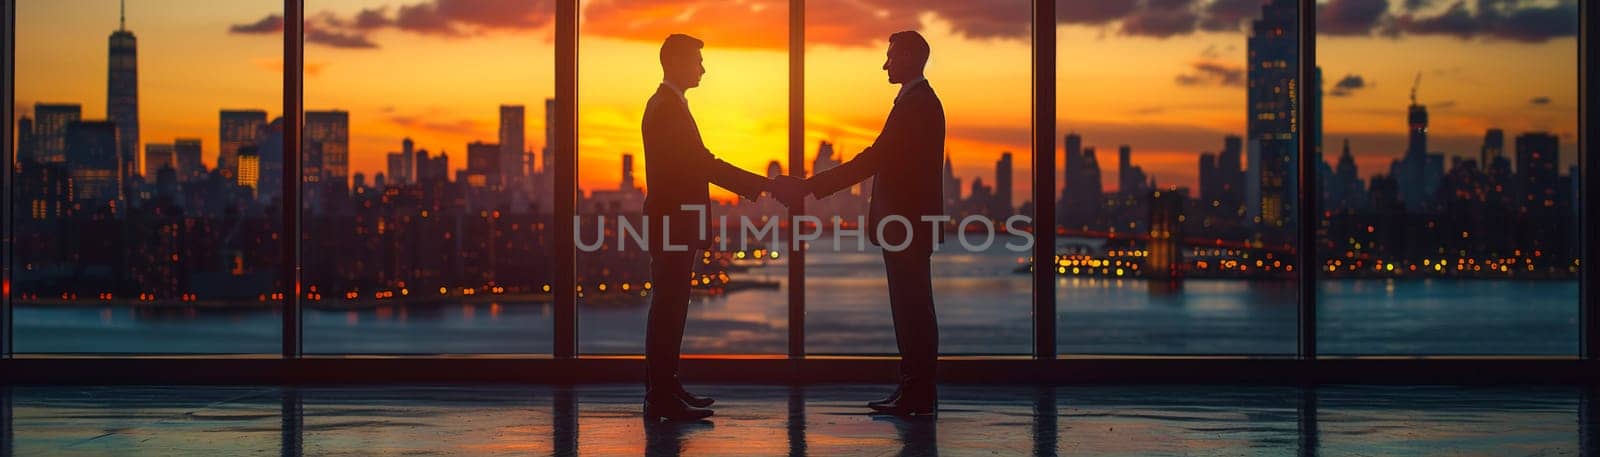 Finalizing a Business Deal with a Firm Handshake Downtown by Benzoix